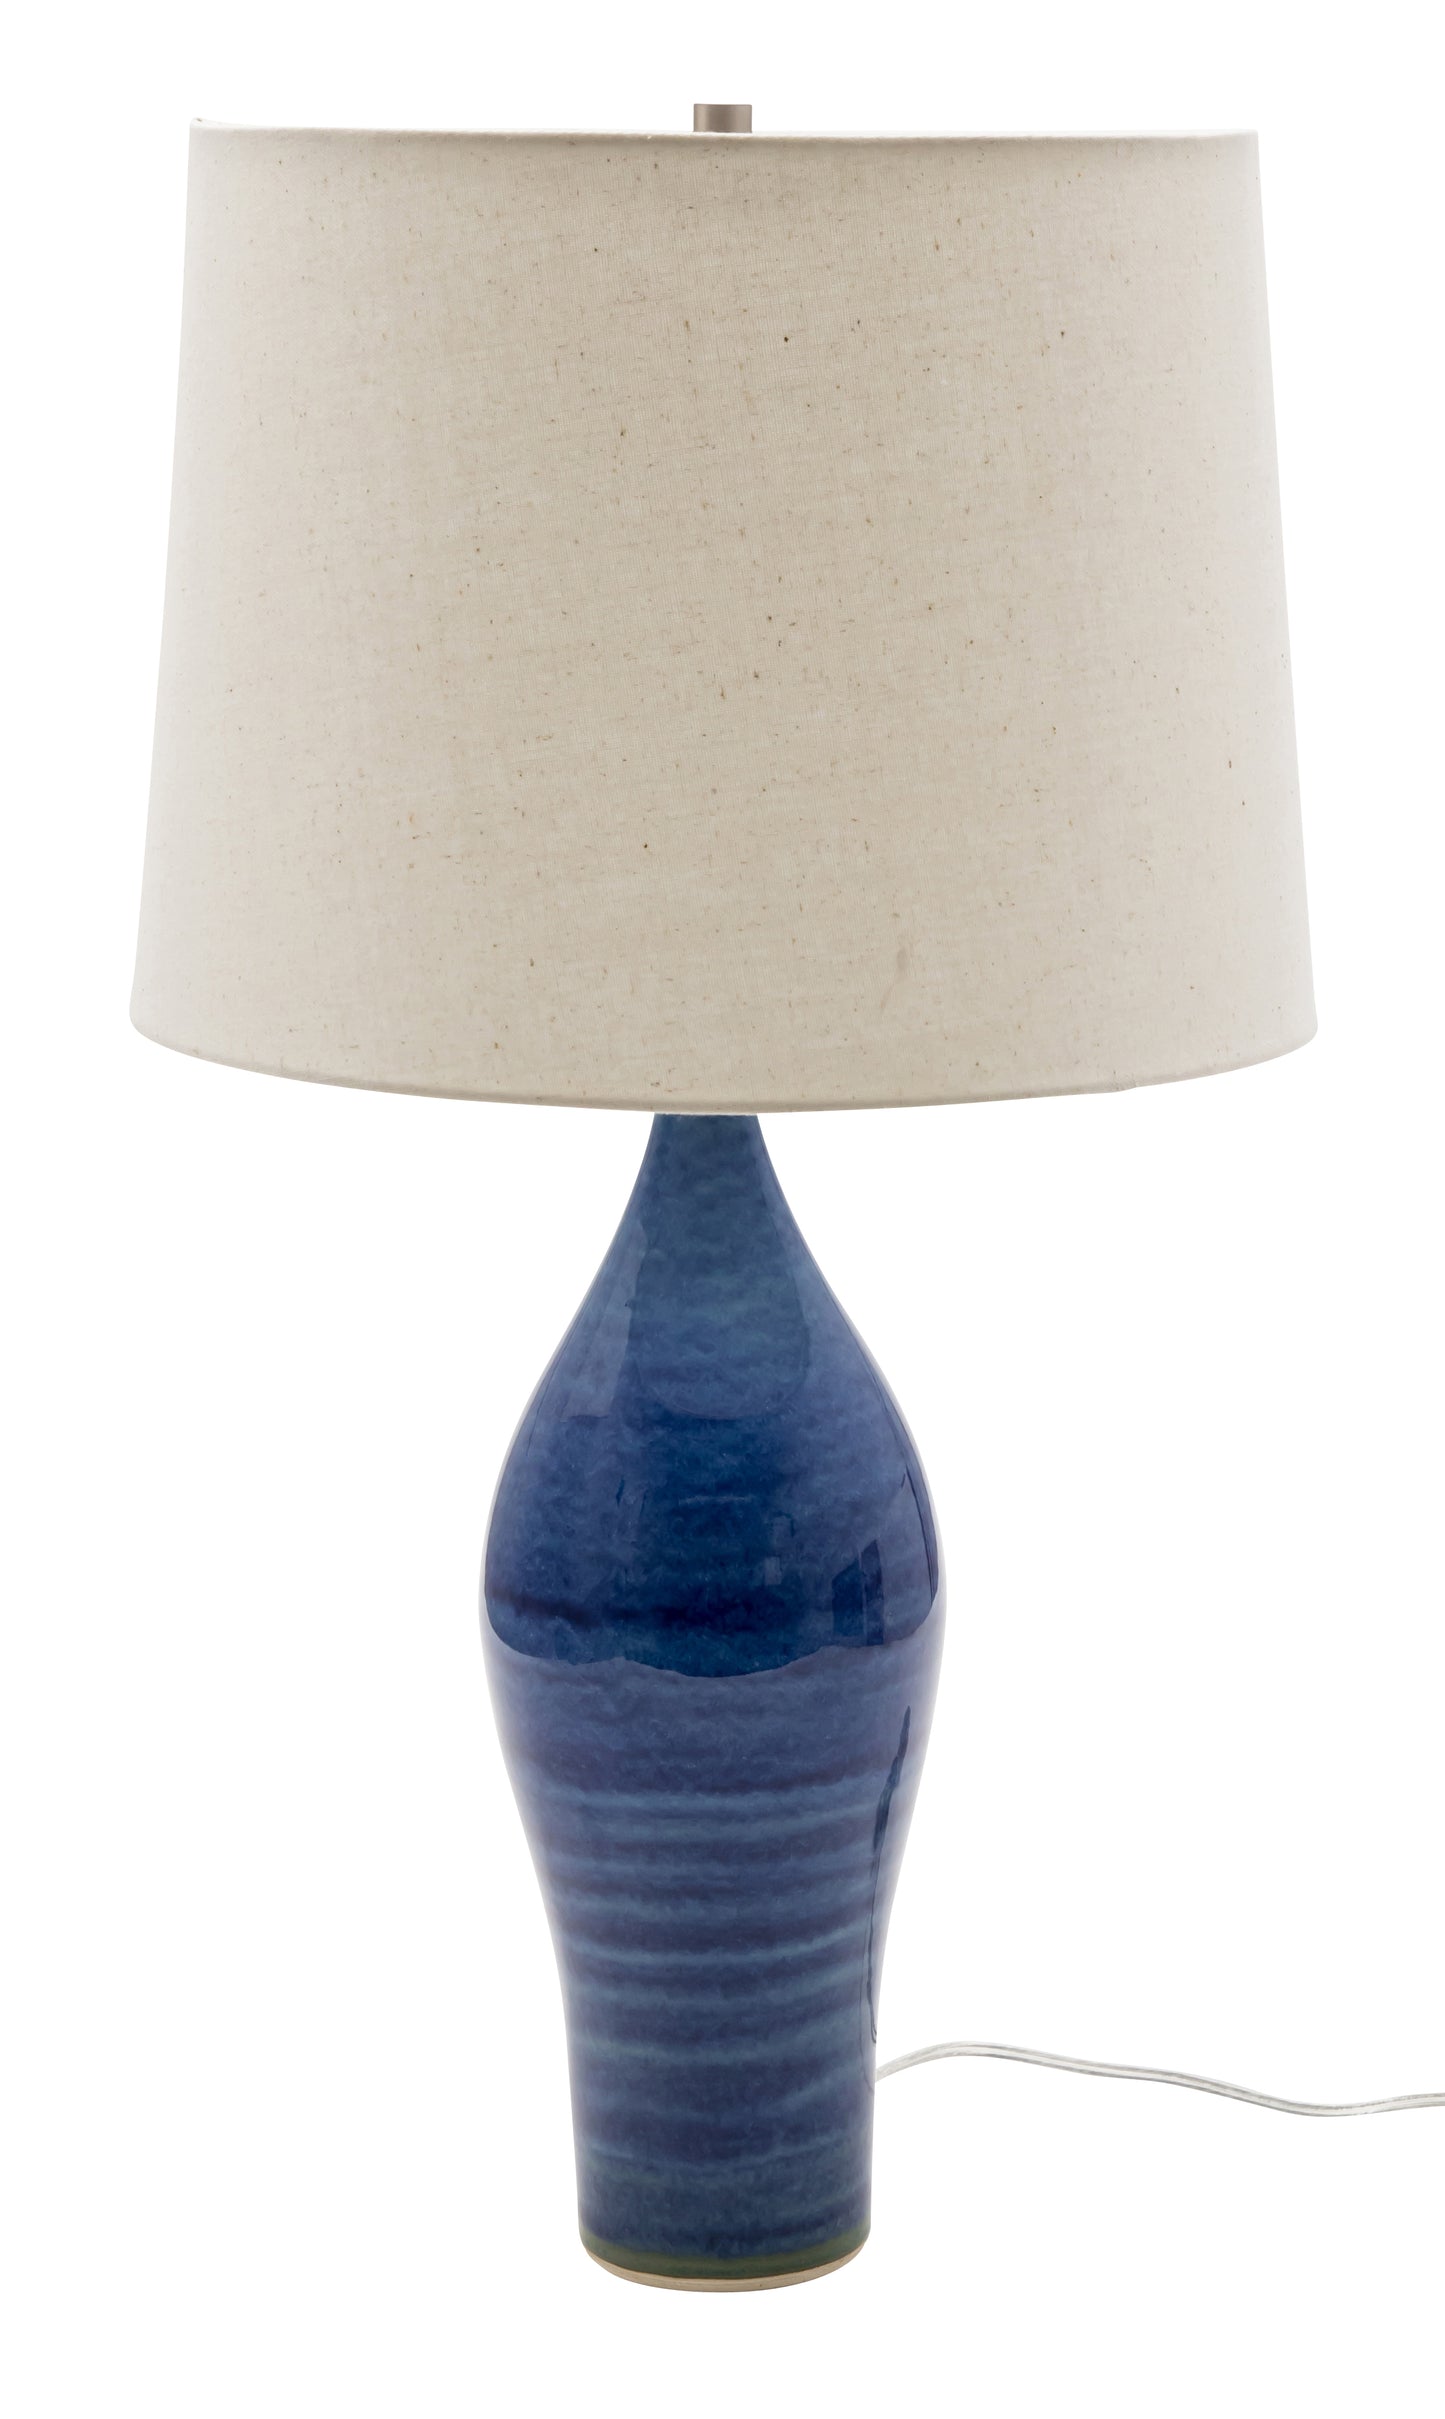 House of Troy Scatchard 27" Stoneware Table Lamp in Blue Gloss GS170-BG